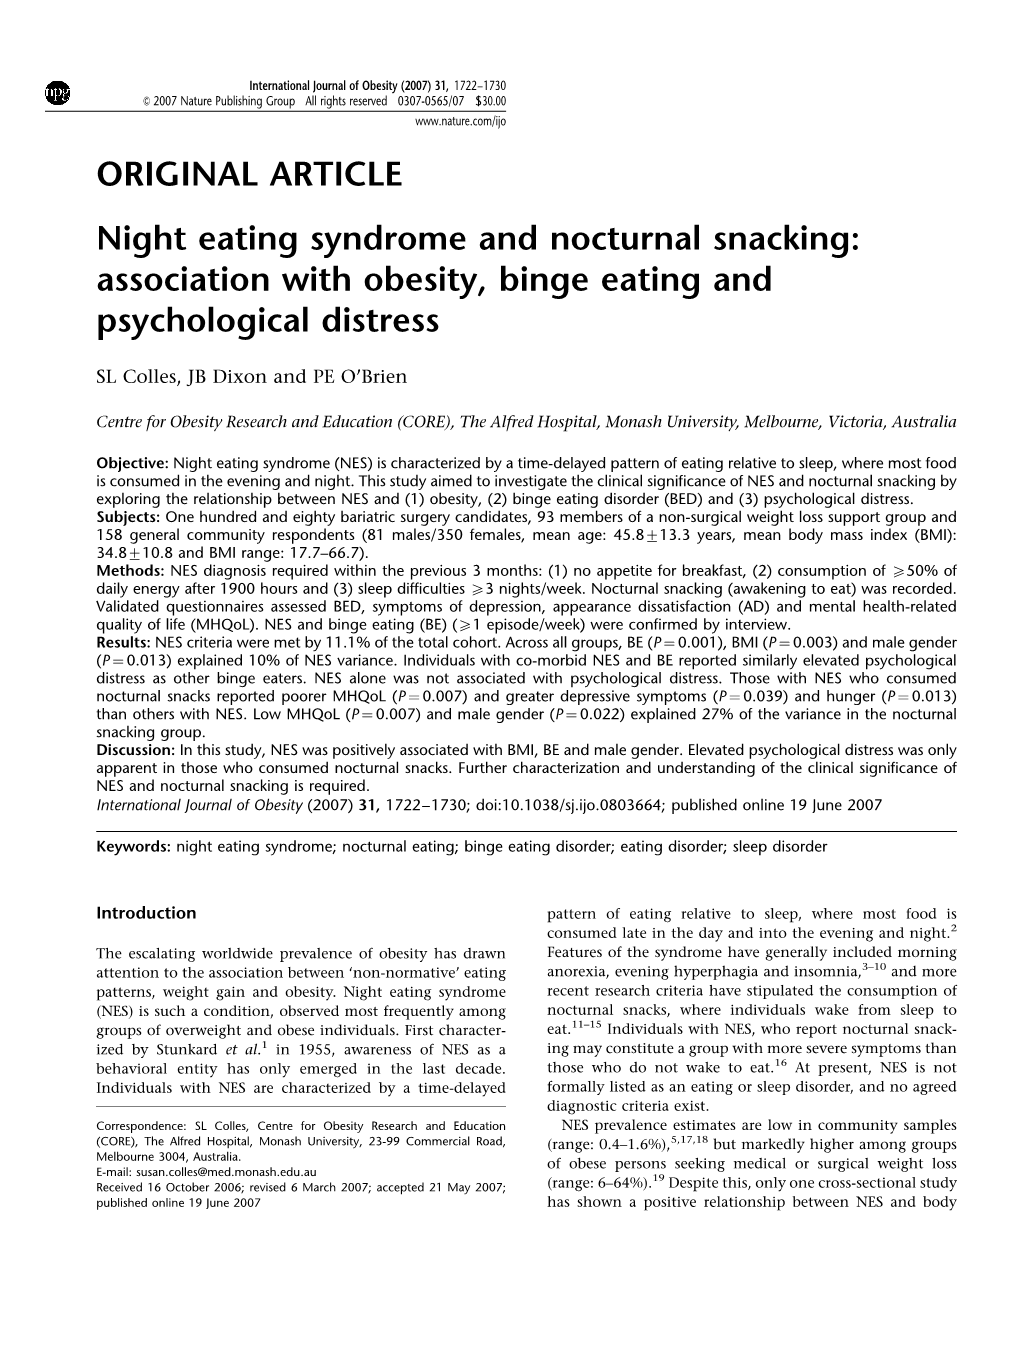 Association with Obesity, Binge Eating and Psychological Distress